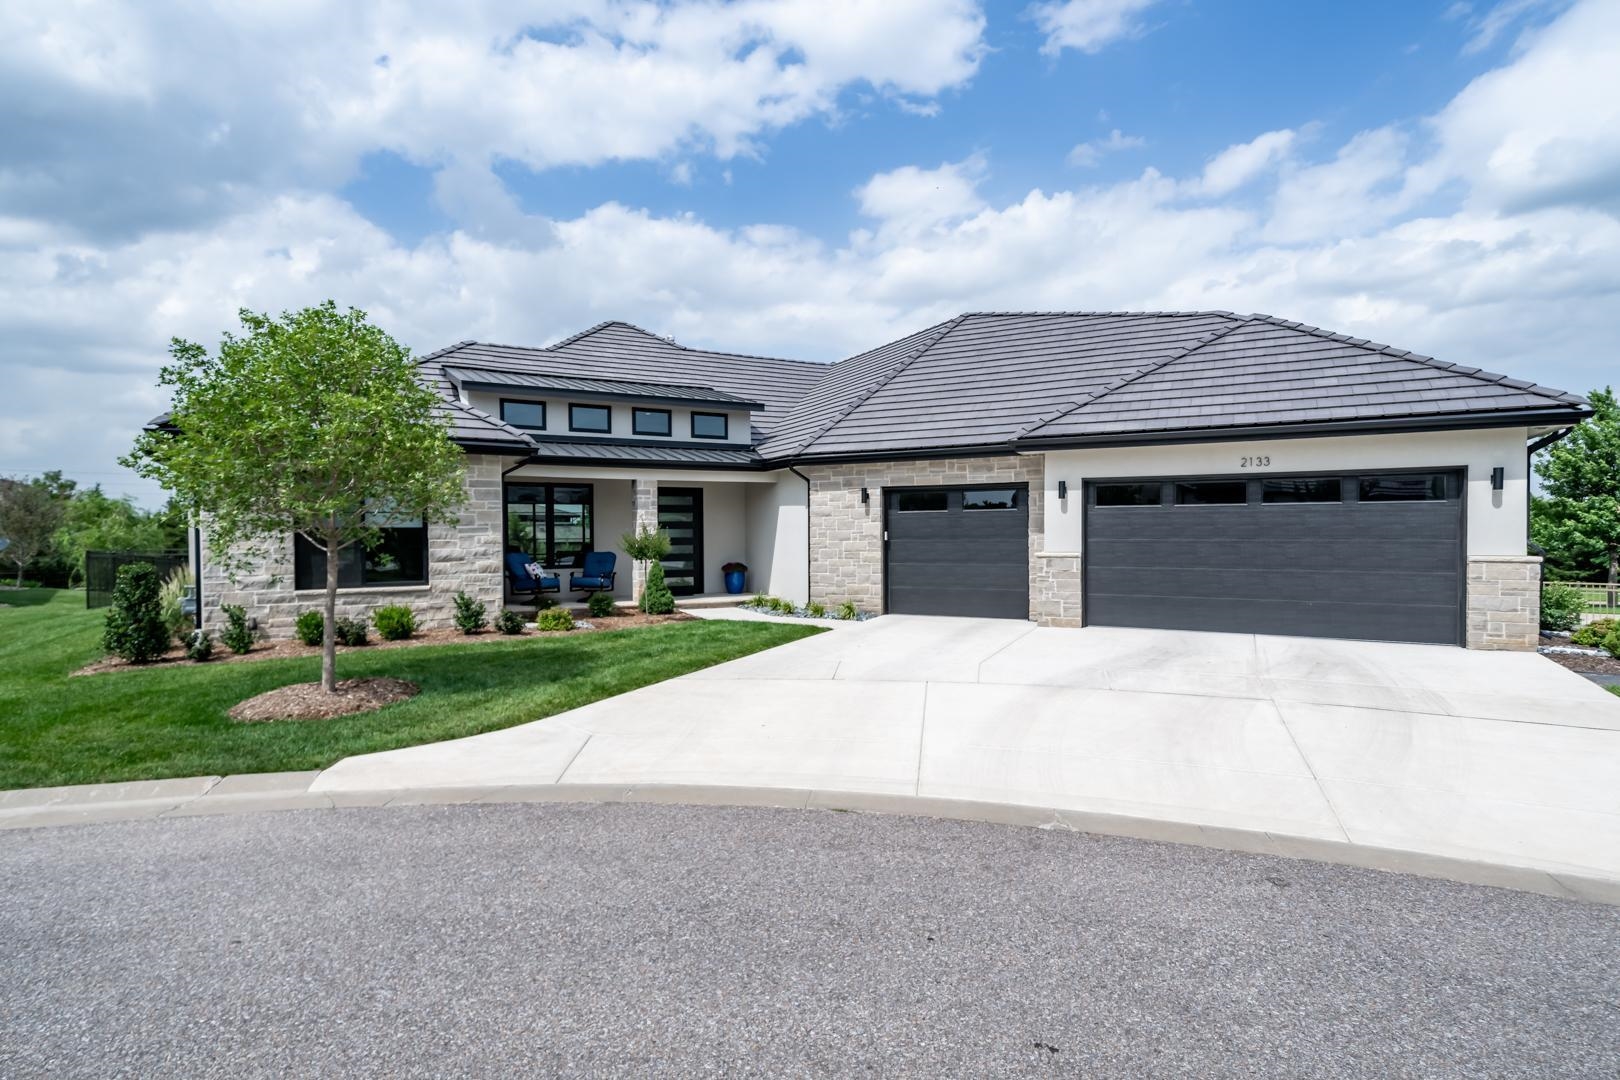 Exceptional, nearly brand new patio home in Oak Creek! Custom built in 2021 this stunning home offer